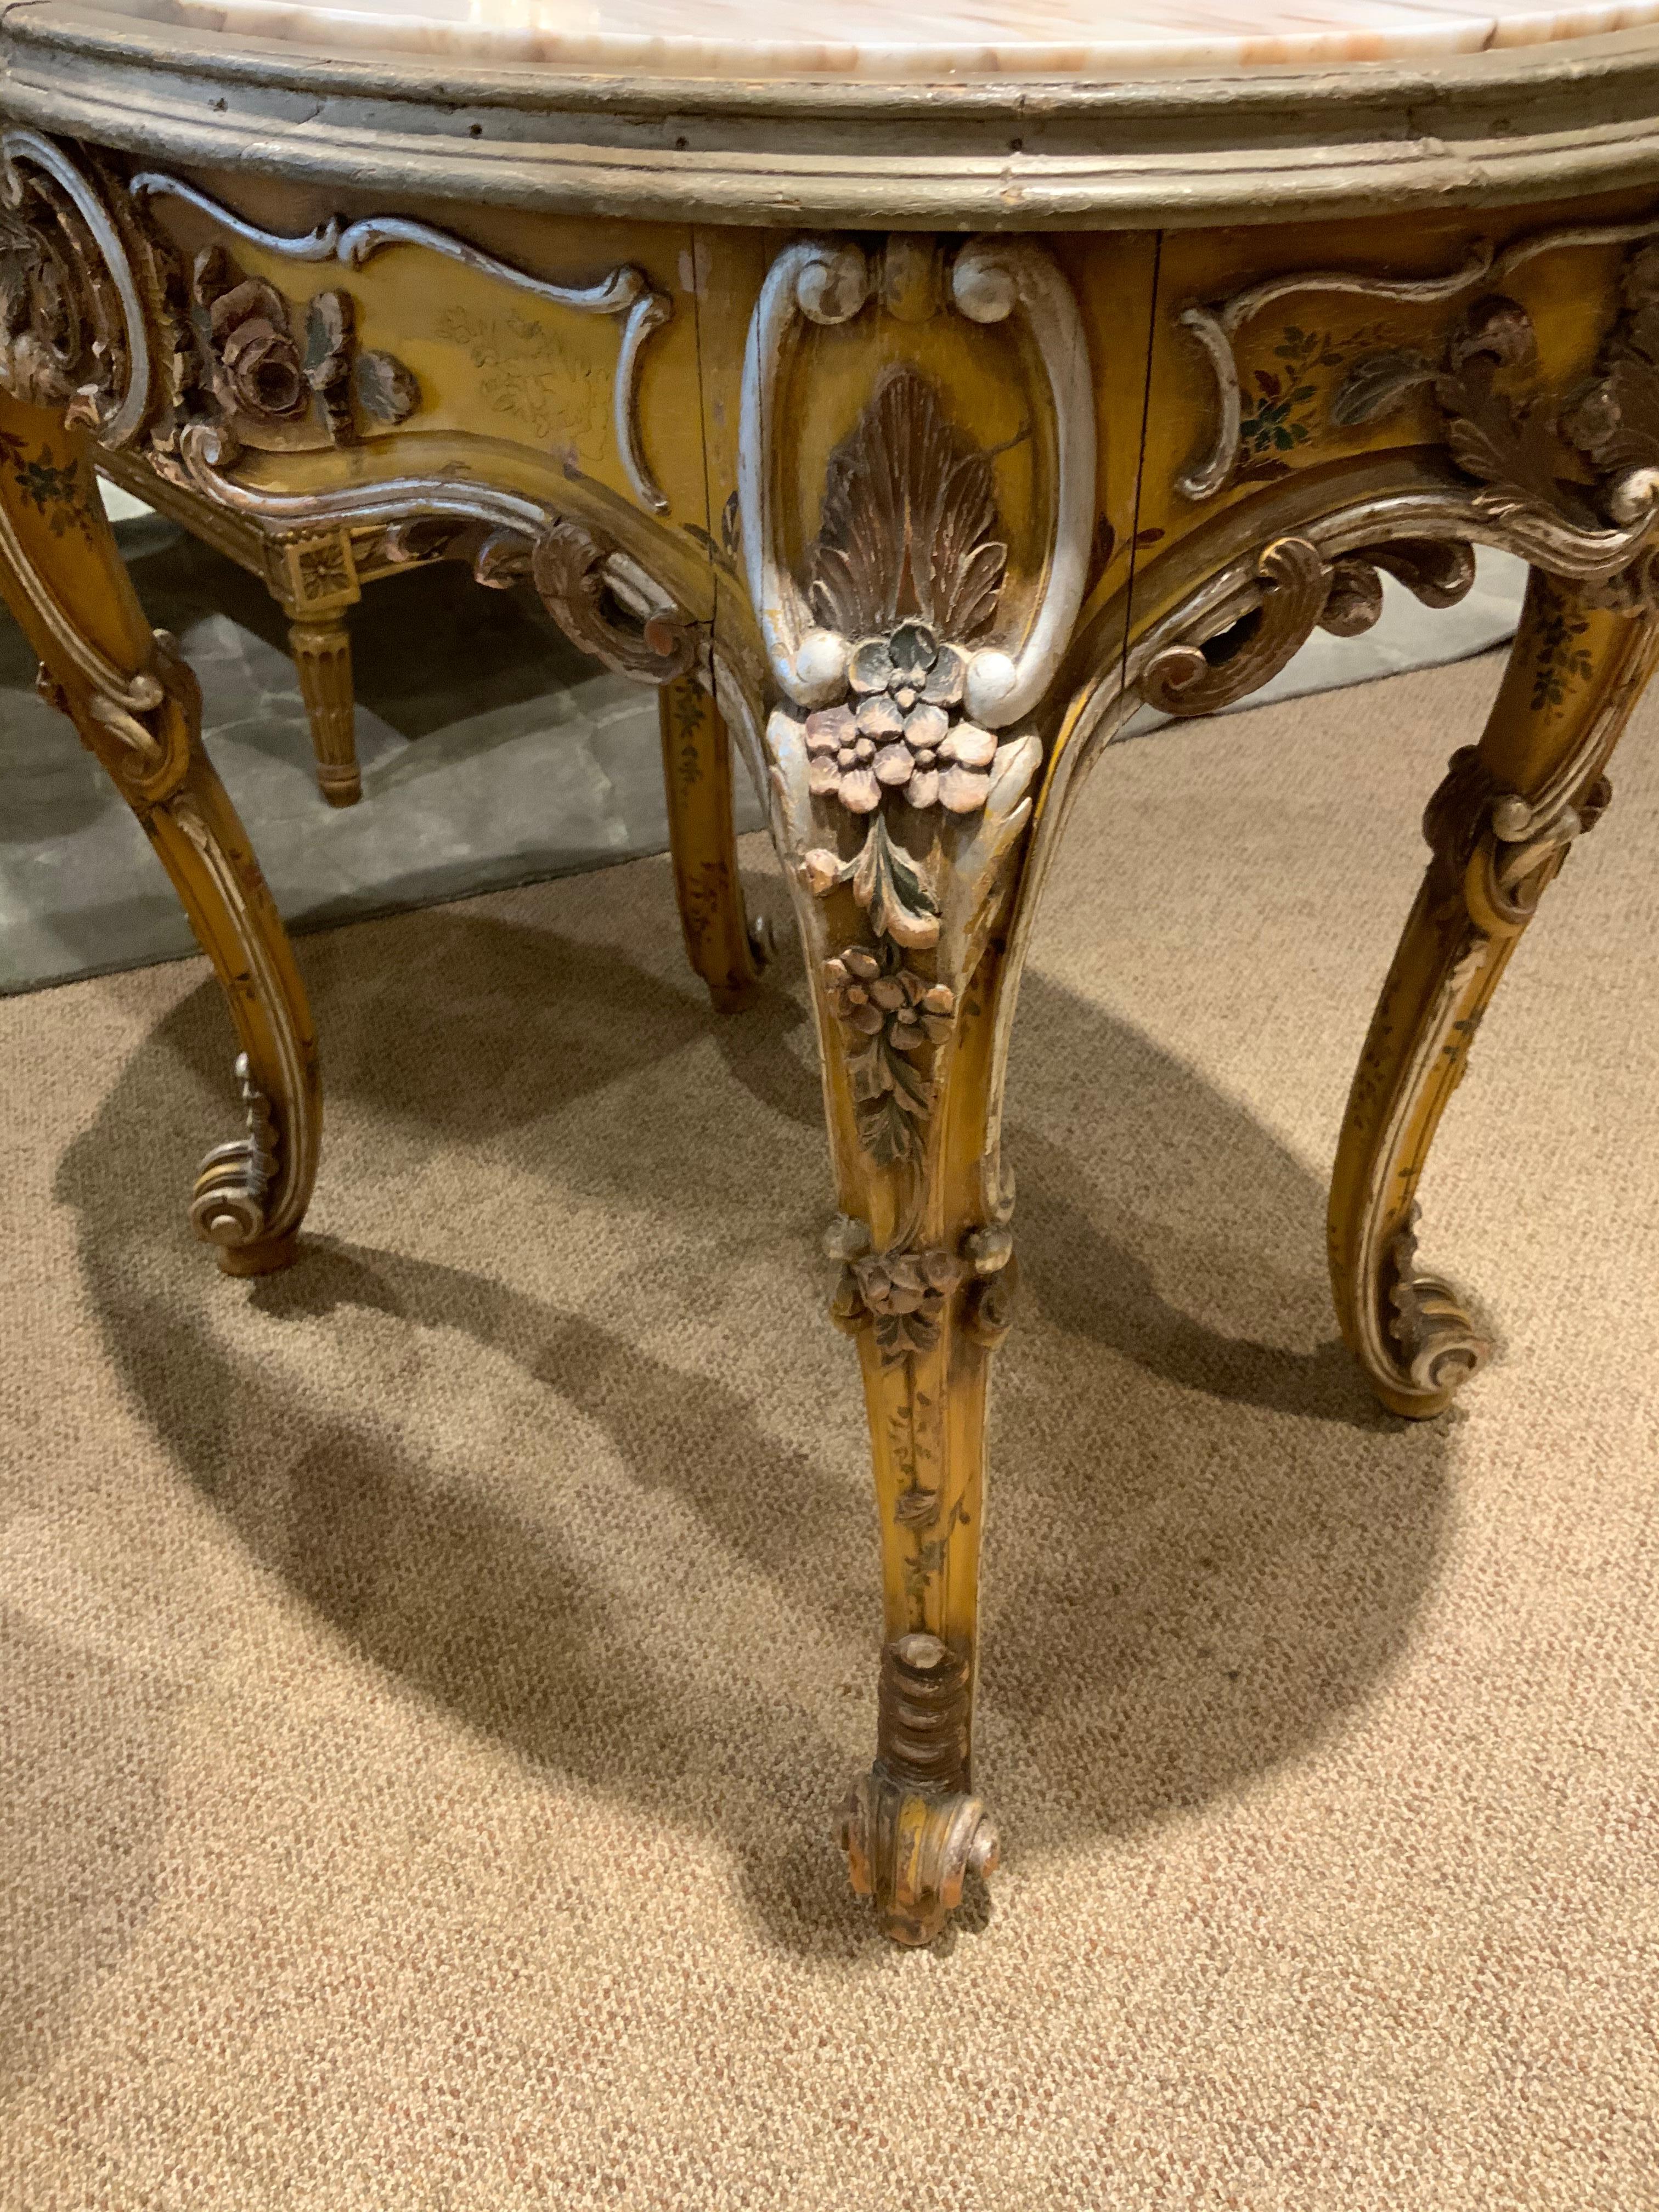 19th Century Oval Venetian Carved and Polychrome Table with a Cream, Gold and Pale Gray Veins For Sale